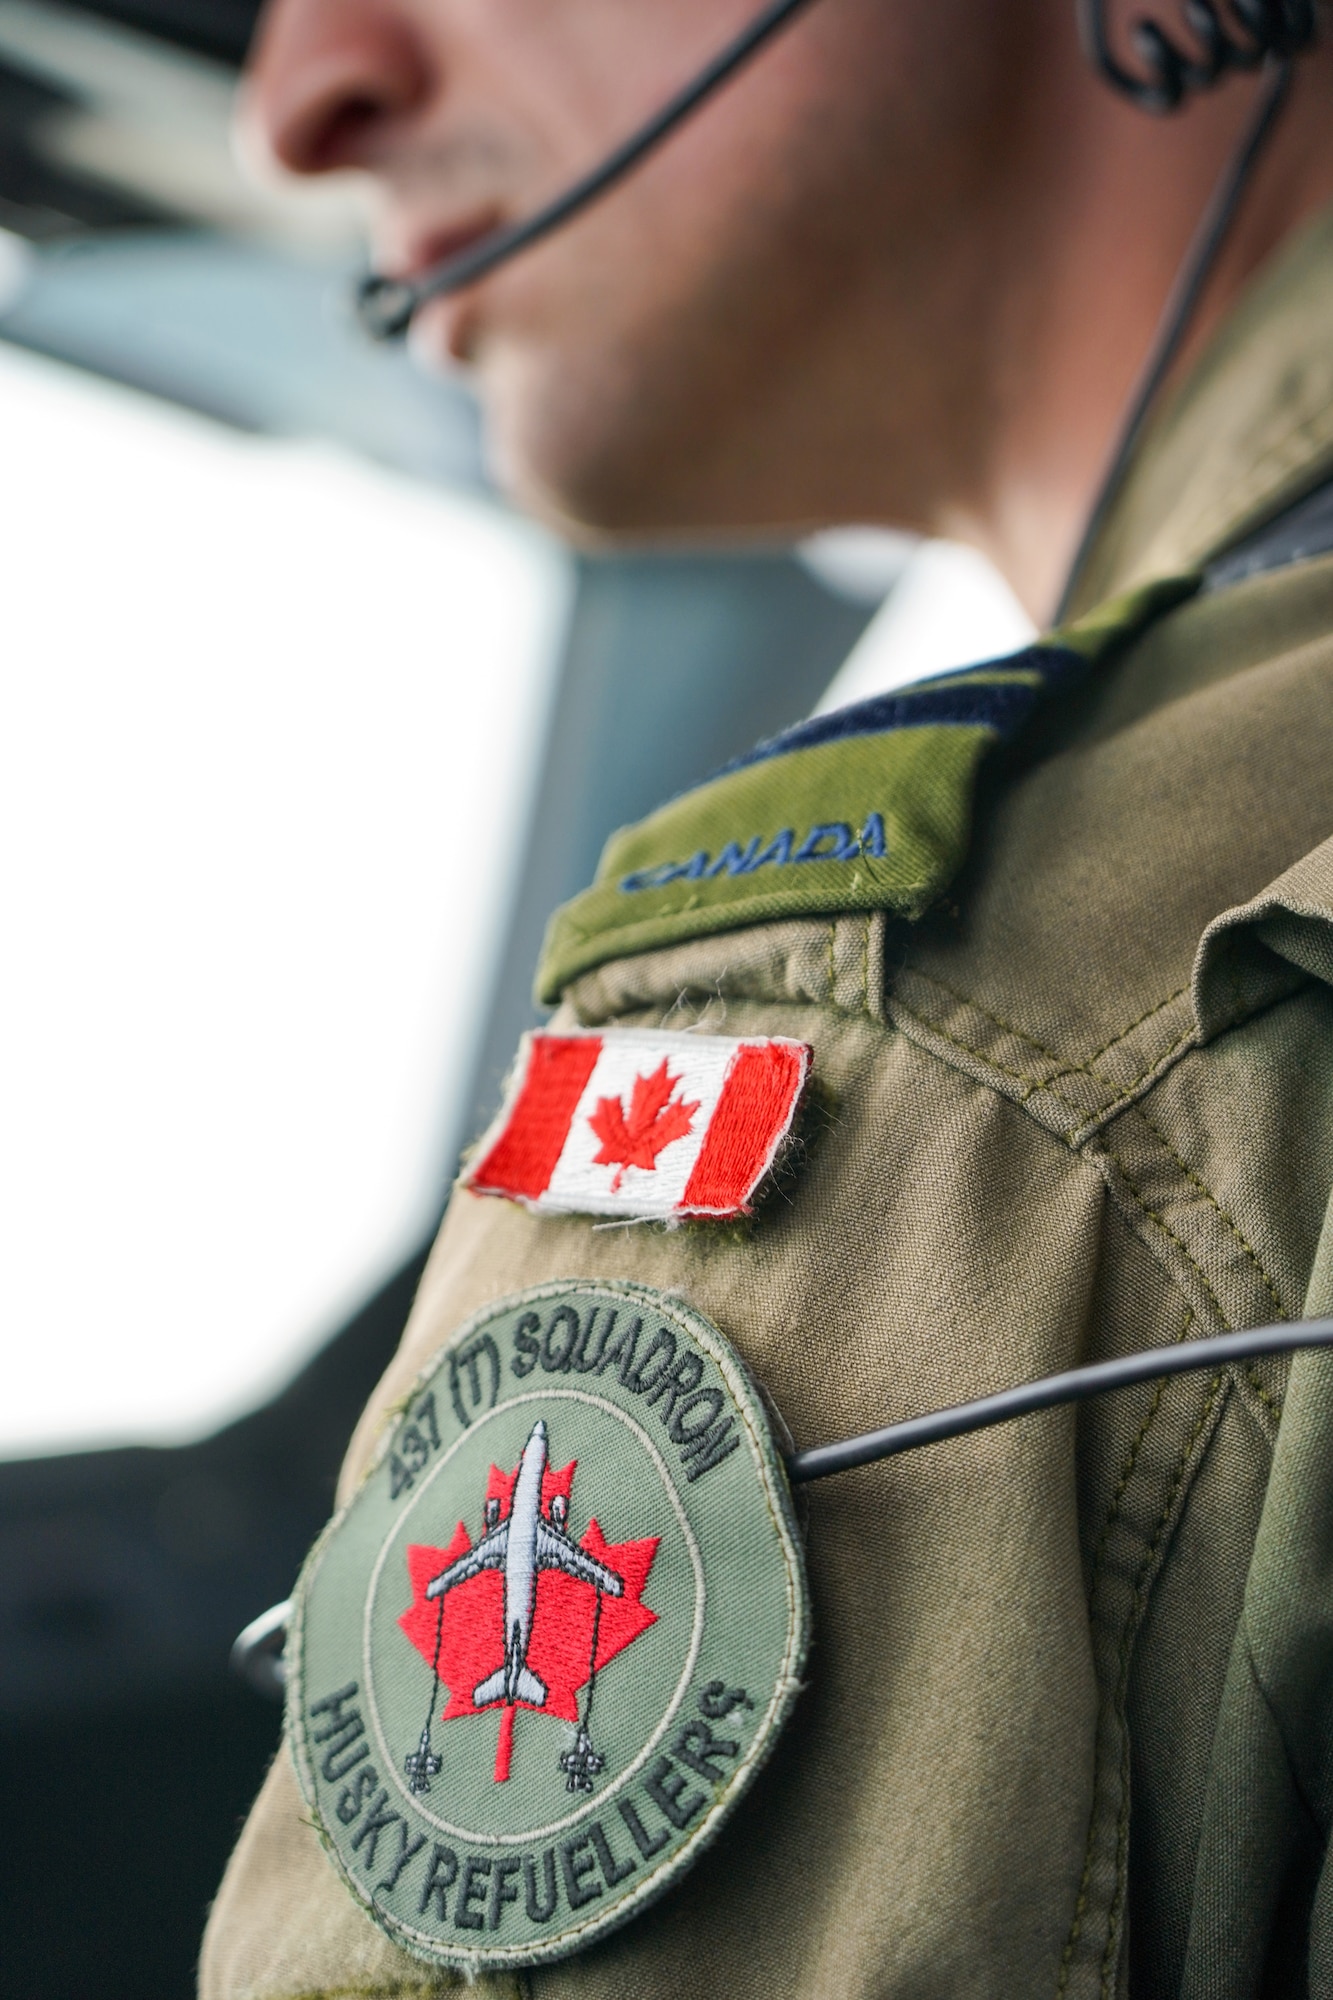 Royal Canadian Air Force pilot Capt. Russ Baker, assigned to the 437th Transport Squadron based out of Canadian Forces Base Trenton, Canada, looks out the cockpit windows of his crew’s CC-150 Polaris refueling tanker while performing refueling operations in training airspace over Alaska during the Red Flag-Alaska 19-3 exercise, Aug. 15, 2019. Red Flag-Alaska, a series of Pacific Air Forces commander-directed field training exercises for U.S. forces, provides joint offensive counter-air, interdiction, close air support, and large force employment training in a simulated combat environment.